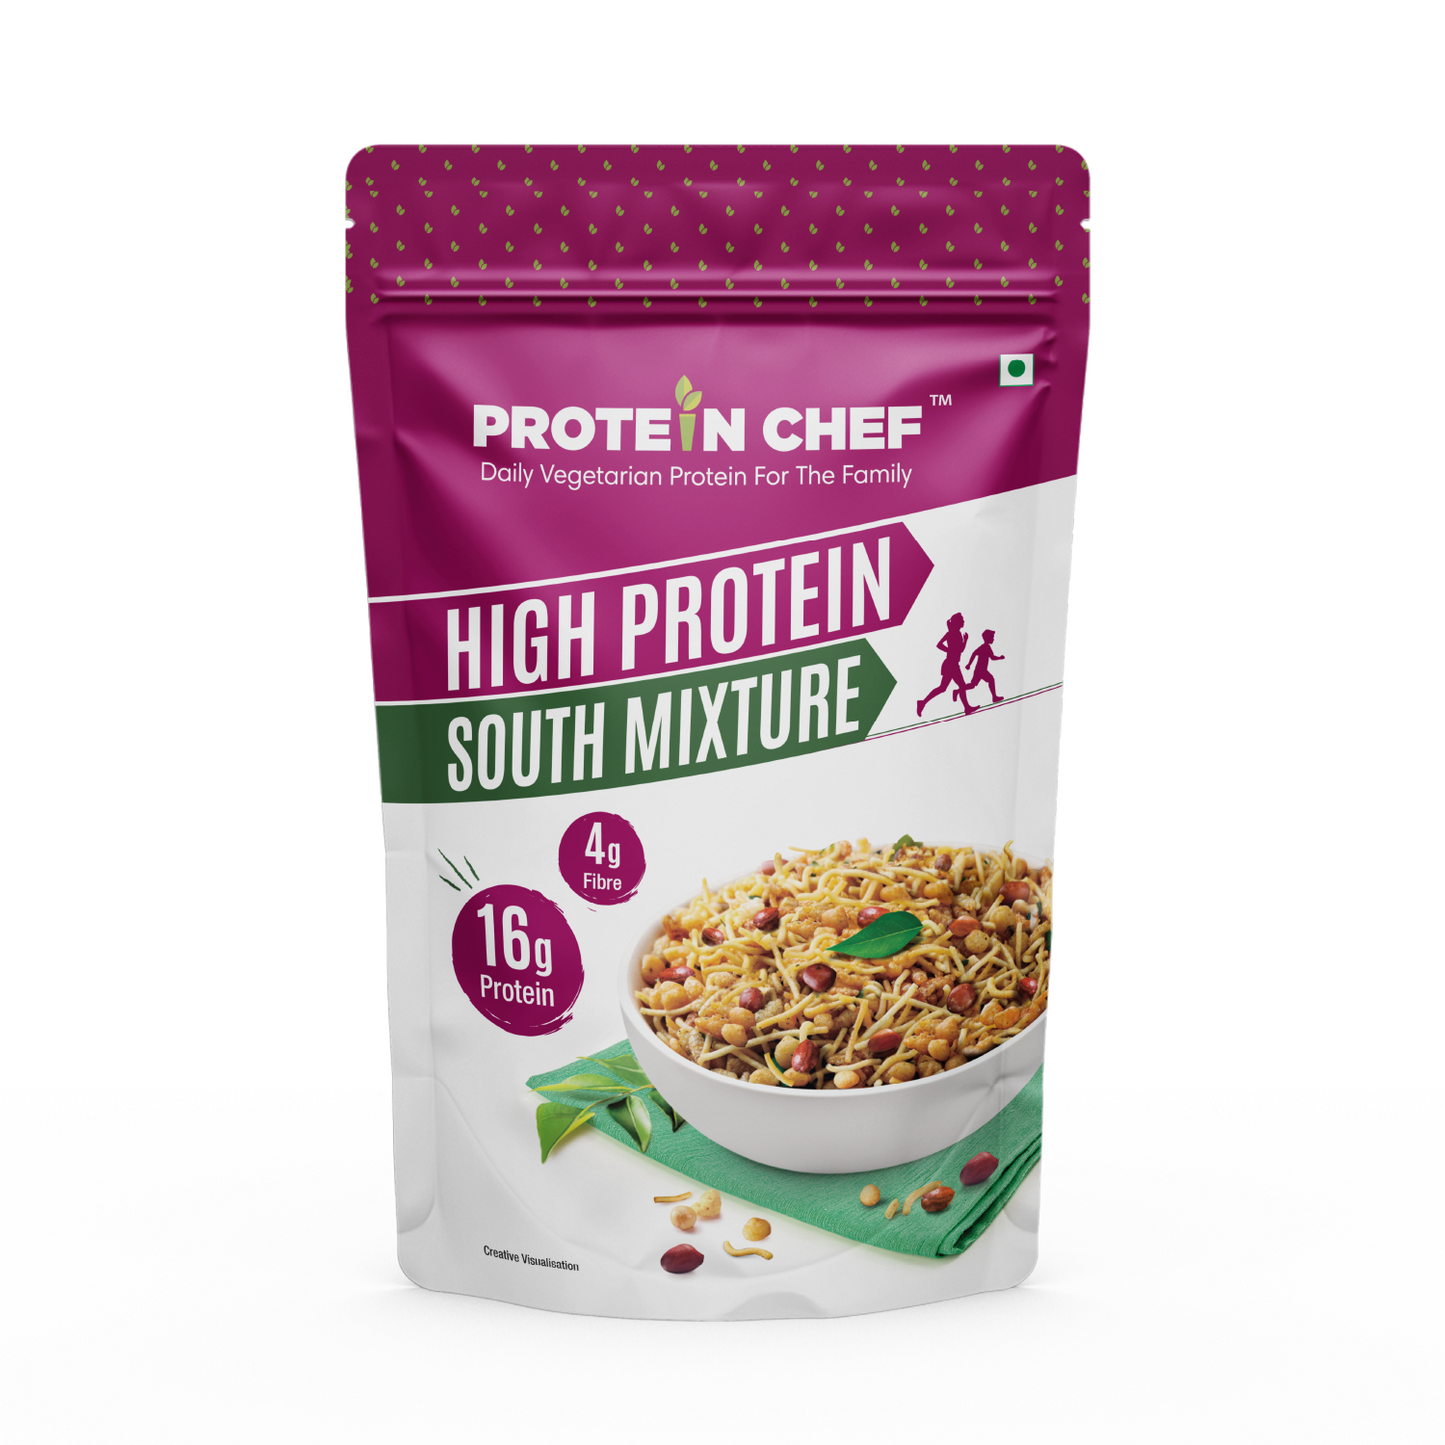 High Protein South Mixture